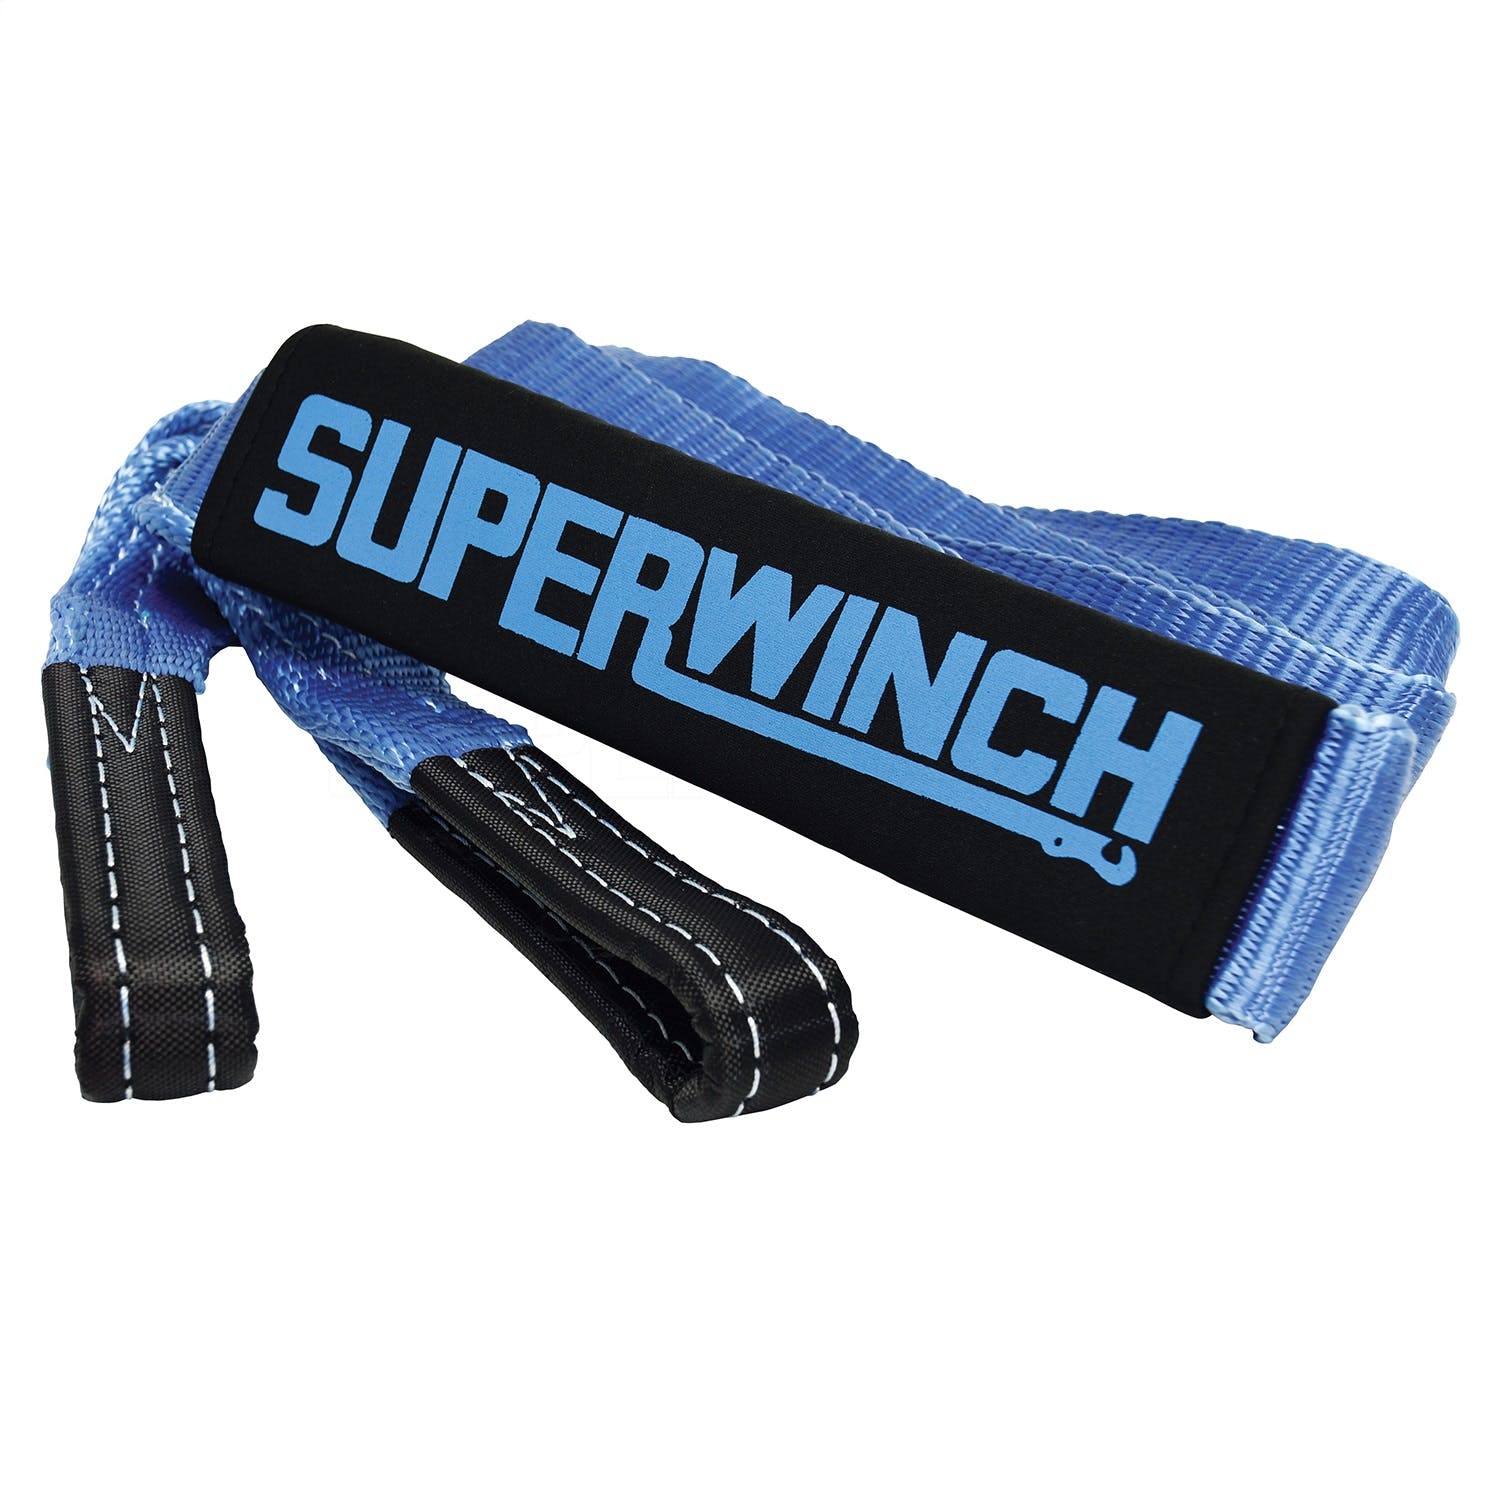 Superwinch 2588 Tree Trunk Protector